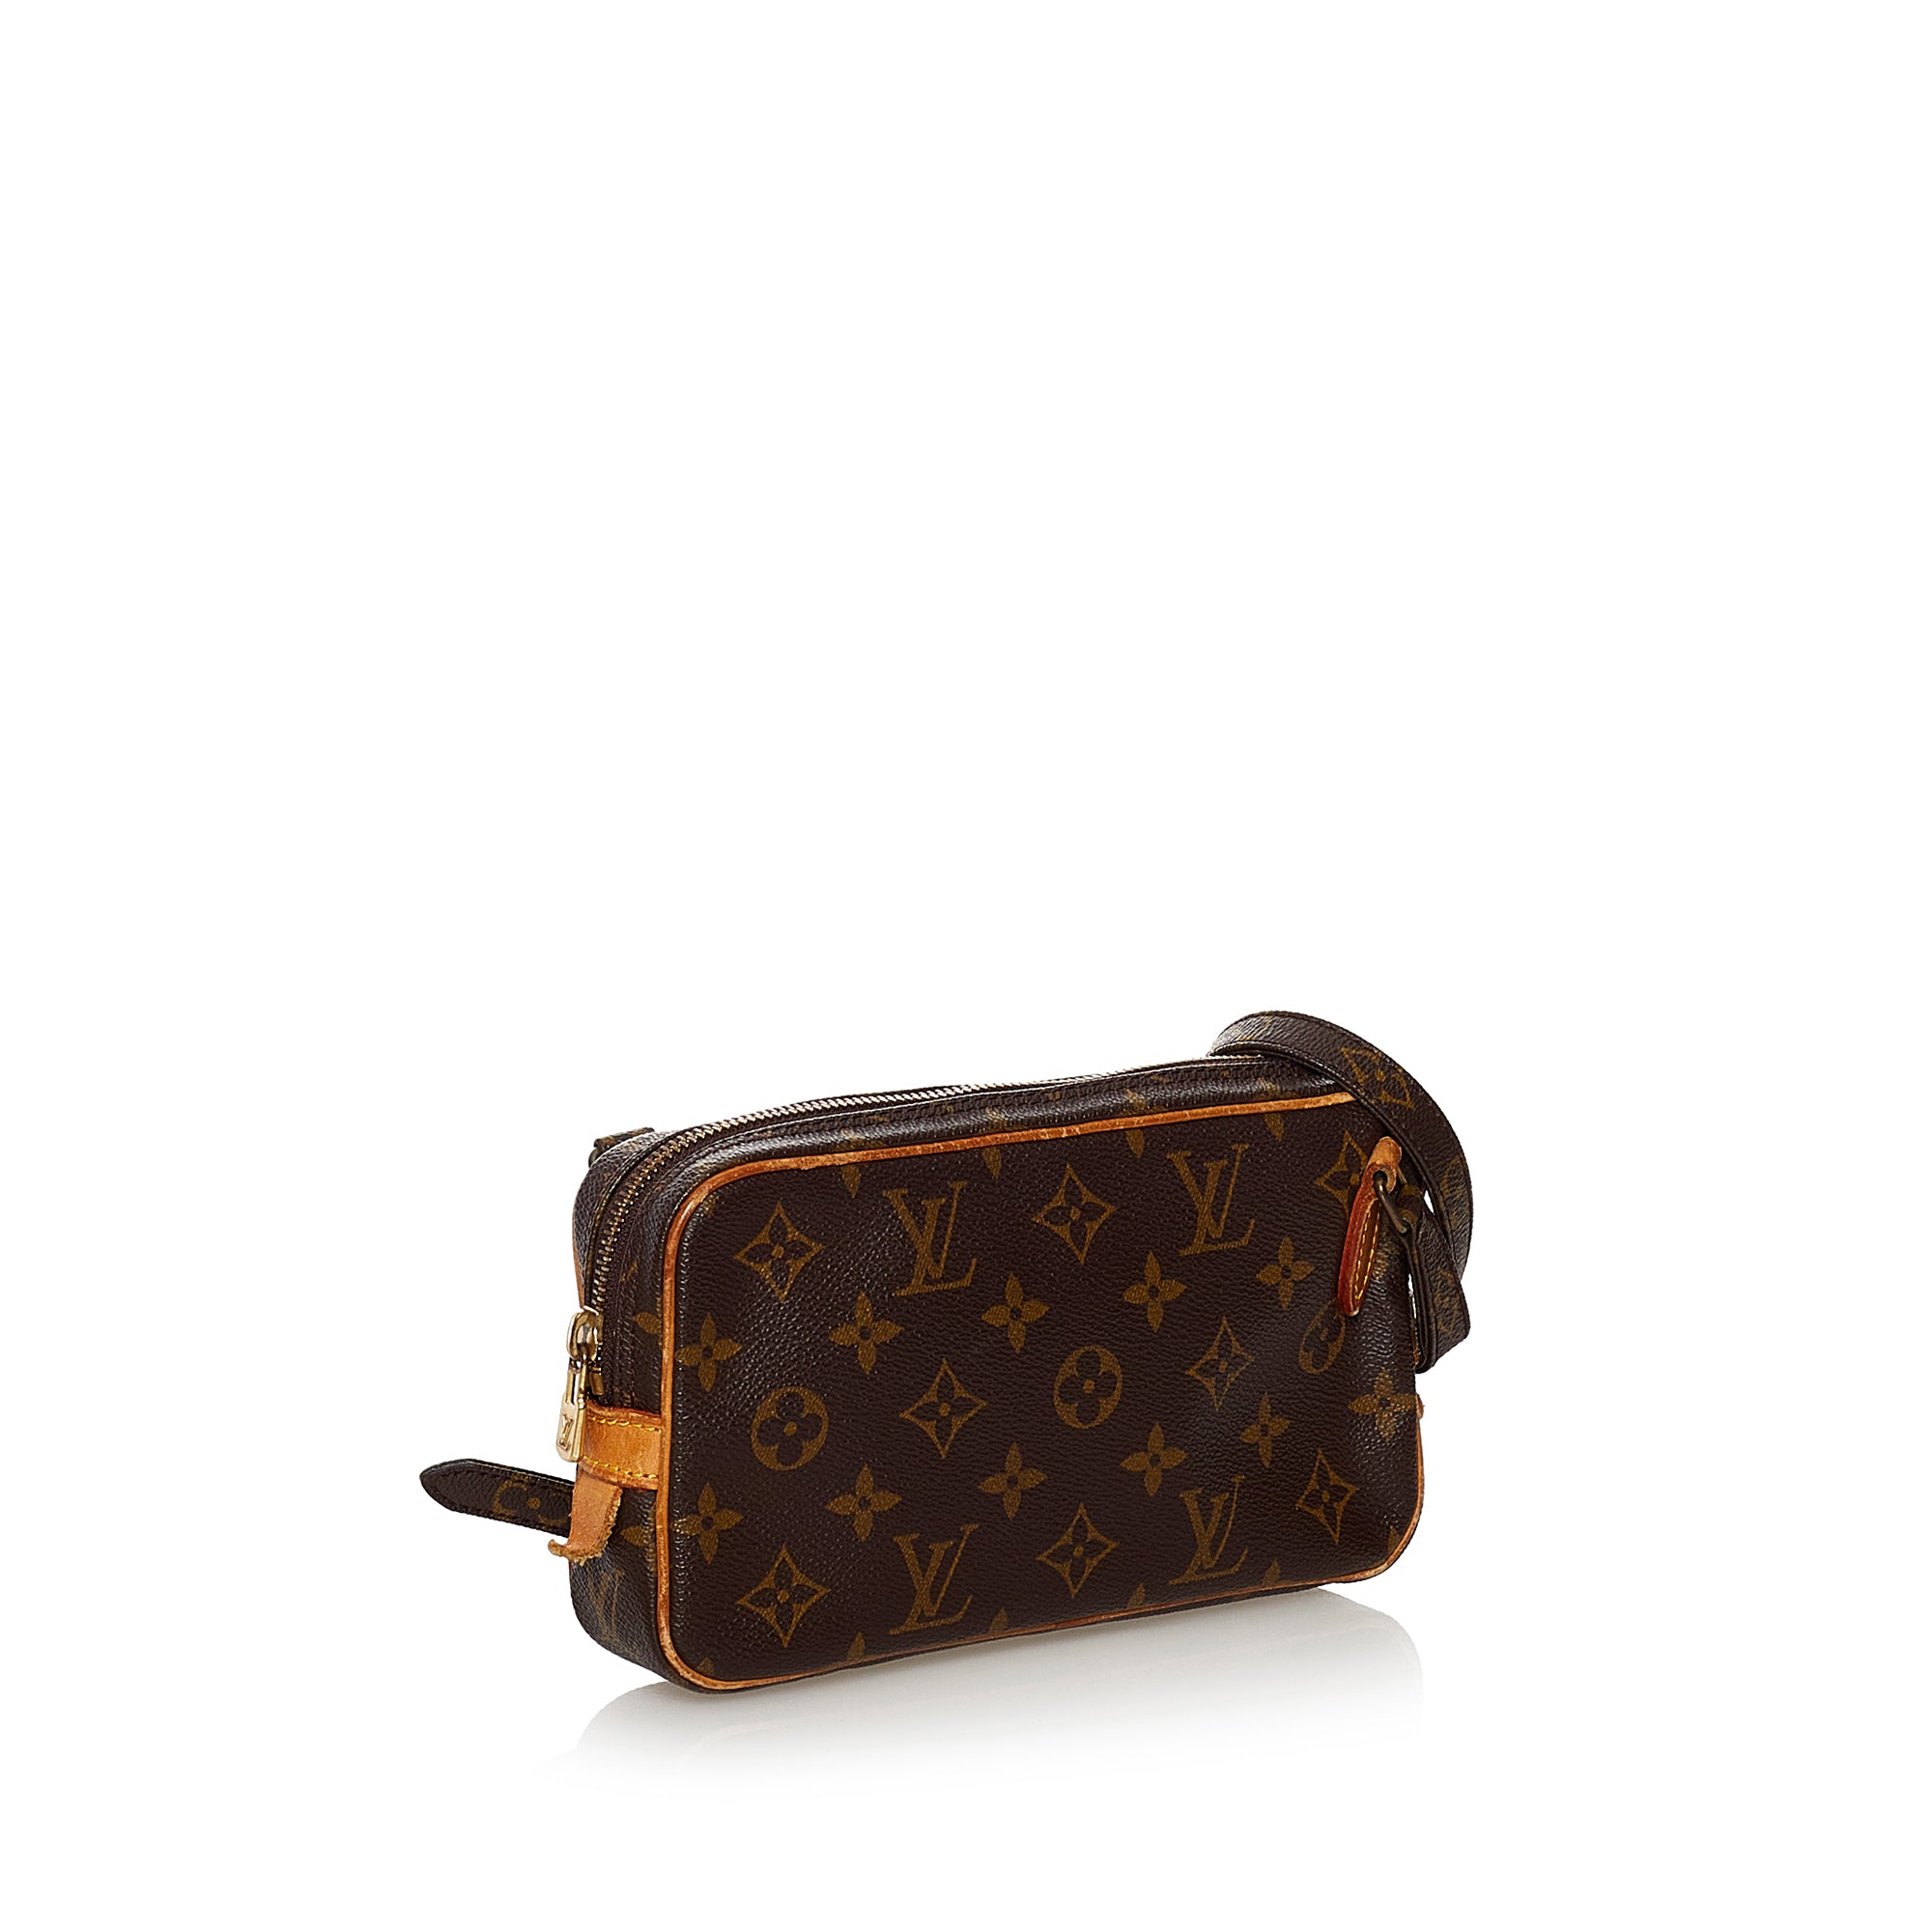 Authentic Louis Vuitton Marly Crossbody Bag